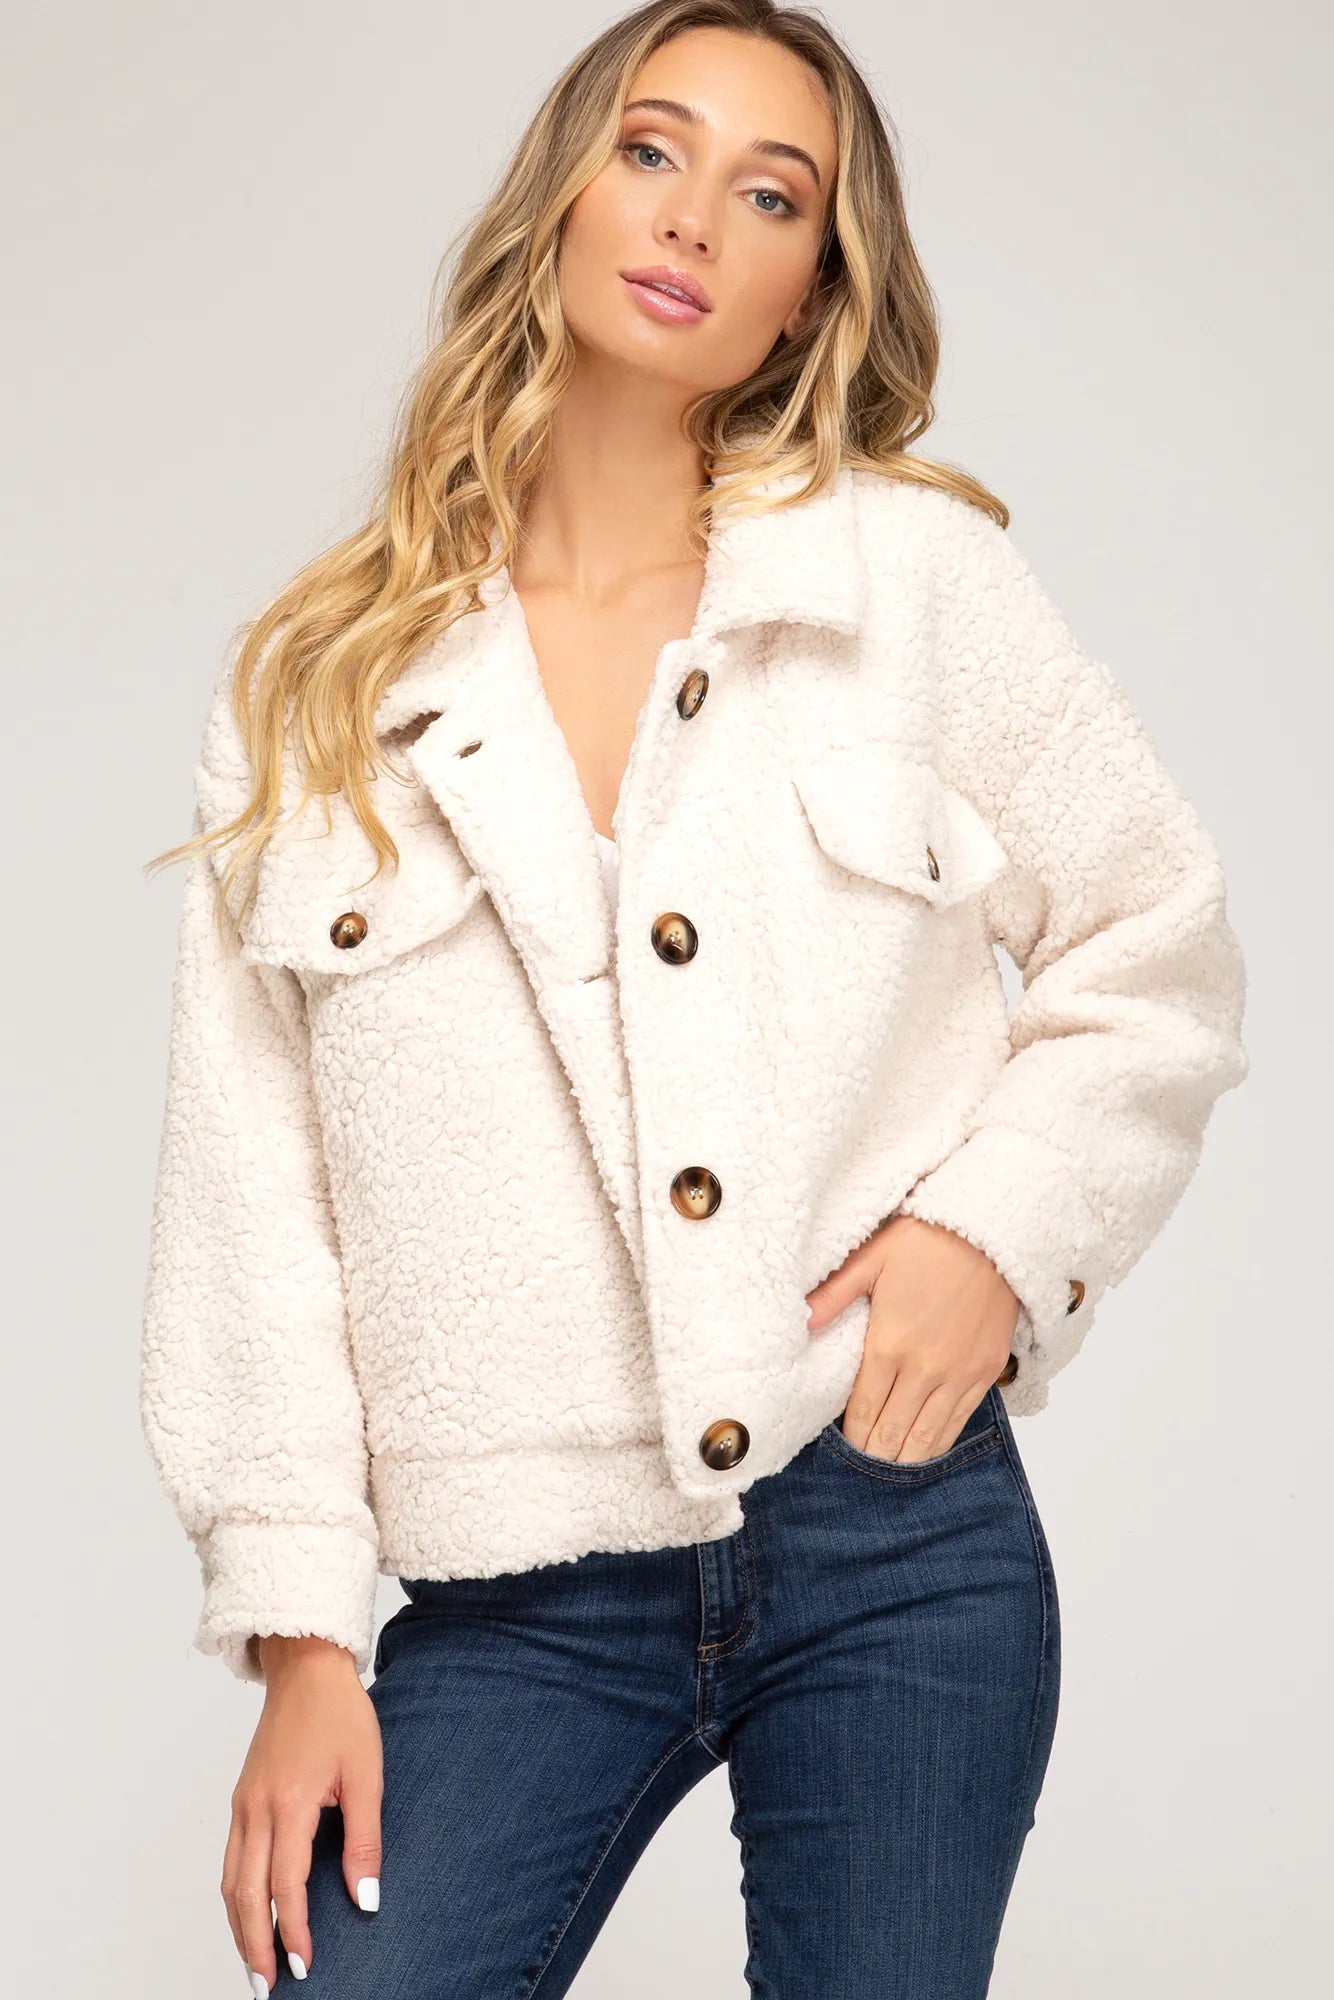 Long sleeve button down teddy bear jacket with front pockets  Ivy and Pearl Boutique Cream M/L 